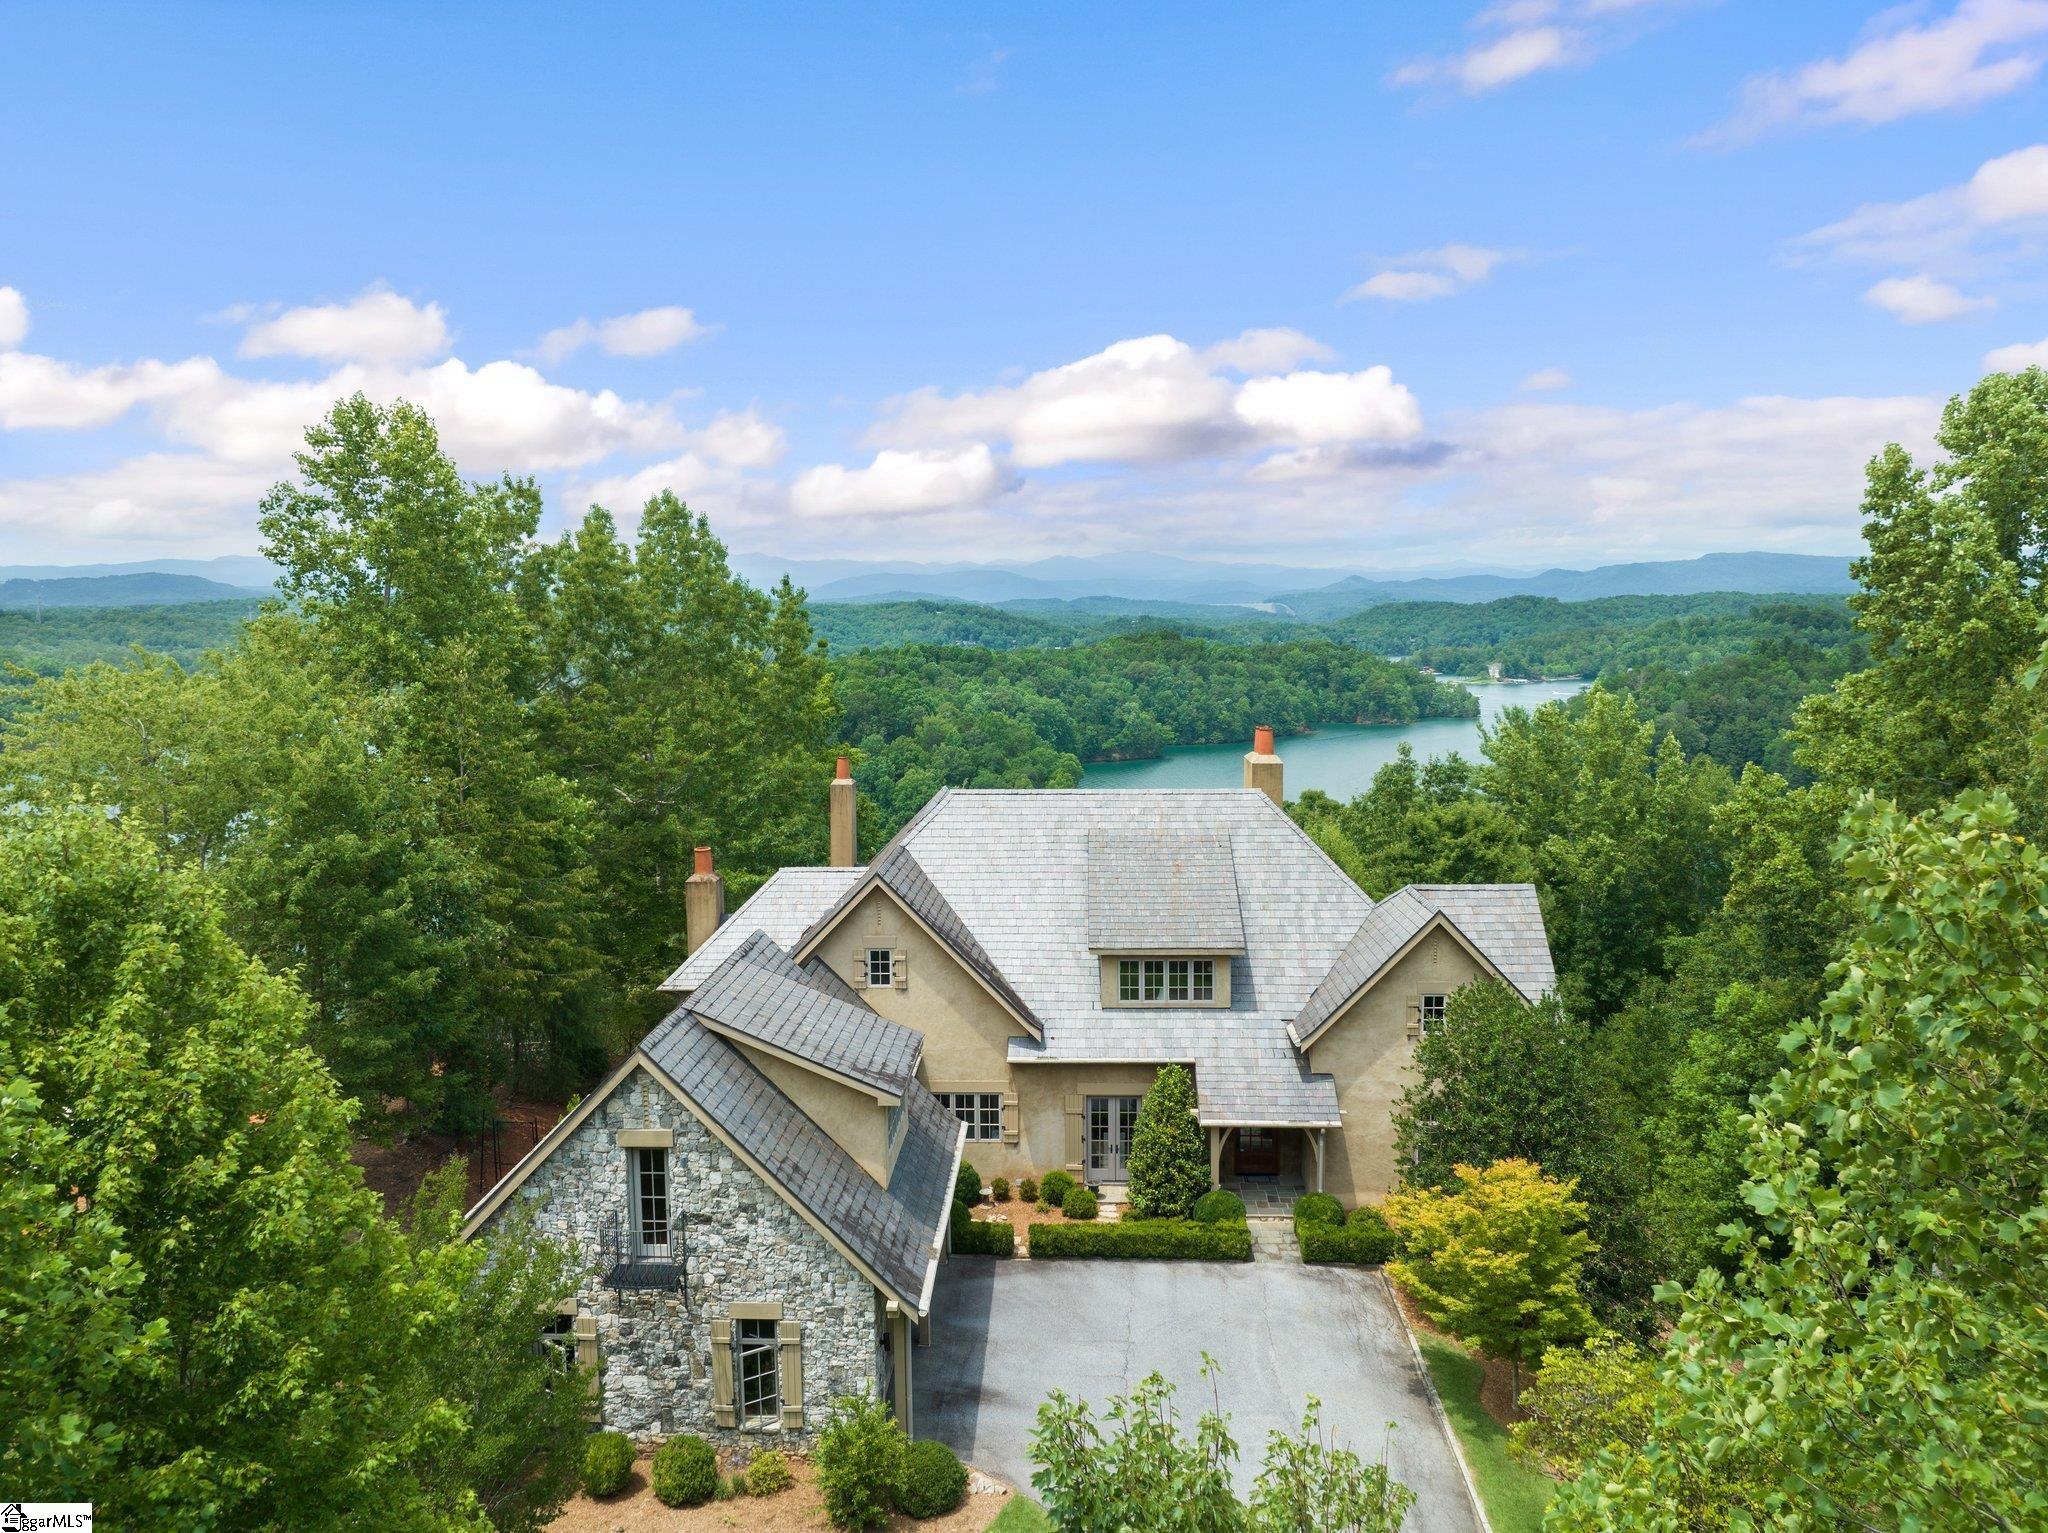 This spectacular French country custom built home is situated on 3.16 acres with views as far as the eye can see. This rare find offers sunrise, sunset, and unobstructed views of Lake Keowee with multi layered Blue Ridge mountains. Enjoy four mountain ranges, Lake Jocassee, lights of Cashiers and Bad Creek Reservoir. 158 feet of lake frontage, distant islands and 180 degree wide open views. Bright, natural light enhances this open floorplan with the help of three sets of glass doors in the gream room. Exposed wood beams, sconces, rustic oak railings, coffered ceilings, heart of pine hardwood flooring, arched built in bookcases, arched doorways, all create the perfect balance for casual and formal entertaining. Perfectly selected antique furnishings highlight the beauty of this home. MAIN LEVEL: Great room, dining room, spacious master with gas log fireplace, gourmet kitchen with huge granite island, customized backsplash, cream cabinets/seeded glass, 6 burner gas stove, Dacor appliances with Sub Zero refrigerator, walk in pantry with built-ins and cozy adjacent keeping room with gas log fireplace. Huge built in china cabinet perfectly situated between the kitchen and sun room. Large laundry room, mud room and gardeners dream with sink and counter with easy access to the outside. The upper level you’ll find a large office with one of the best views in the house, 20x20 bedroom that will become the kids favorite place to go - four twin beds built out of rustic wood, vaulted ceiling with antique whitewood beams and wide plank painted floors with easy access to the large full bath. The TERRACE LEVEL includes rec room with gas log fireplace, three ensuite bedrooms and two large storage rooms. Dock permit has been applied for and path to the lake has been cut in. The $72,000 Premier membership allows access to all the Reserve amenities. The Reserve at Lake Keowee offers a Jack Nicklaus Signature Golf Course, a par 3 practice facility with driving range and outdoor bar, Clubhouse with fine dining, pub area and wine bar, Fitness Center, Hiking Trails, 4 Har-Tru Clay Tennis Courts, Lakeside Resort-Style Pool and Cabana, Settlement Pool, 8 Pickleball Courts, Marina offering both slips and boat rentals, and Market great for lunch and select provisions. This gated community offers many activities including fitness classes, various social clubs, and a high-speed fiber-optic internet system in place. The Reserve at Lake Keowee is a full amenity lakefront golf community with additional amenities planned for the future!